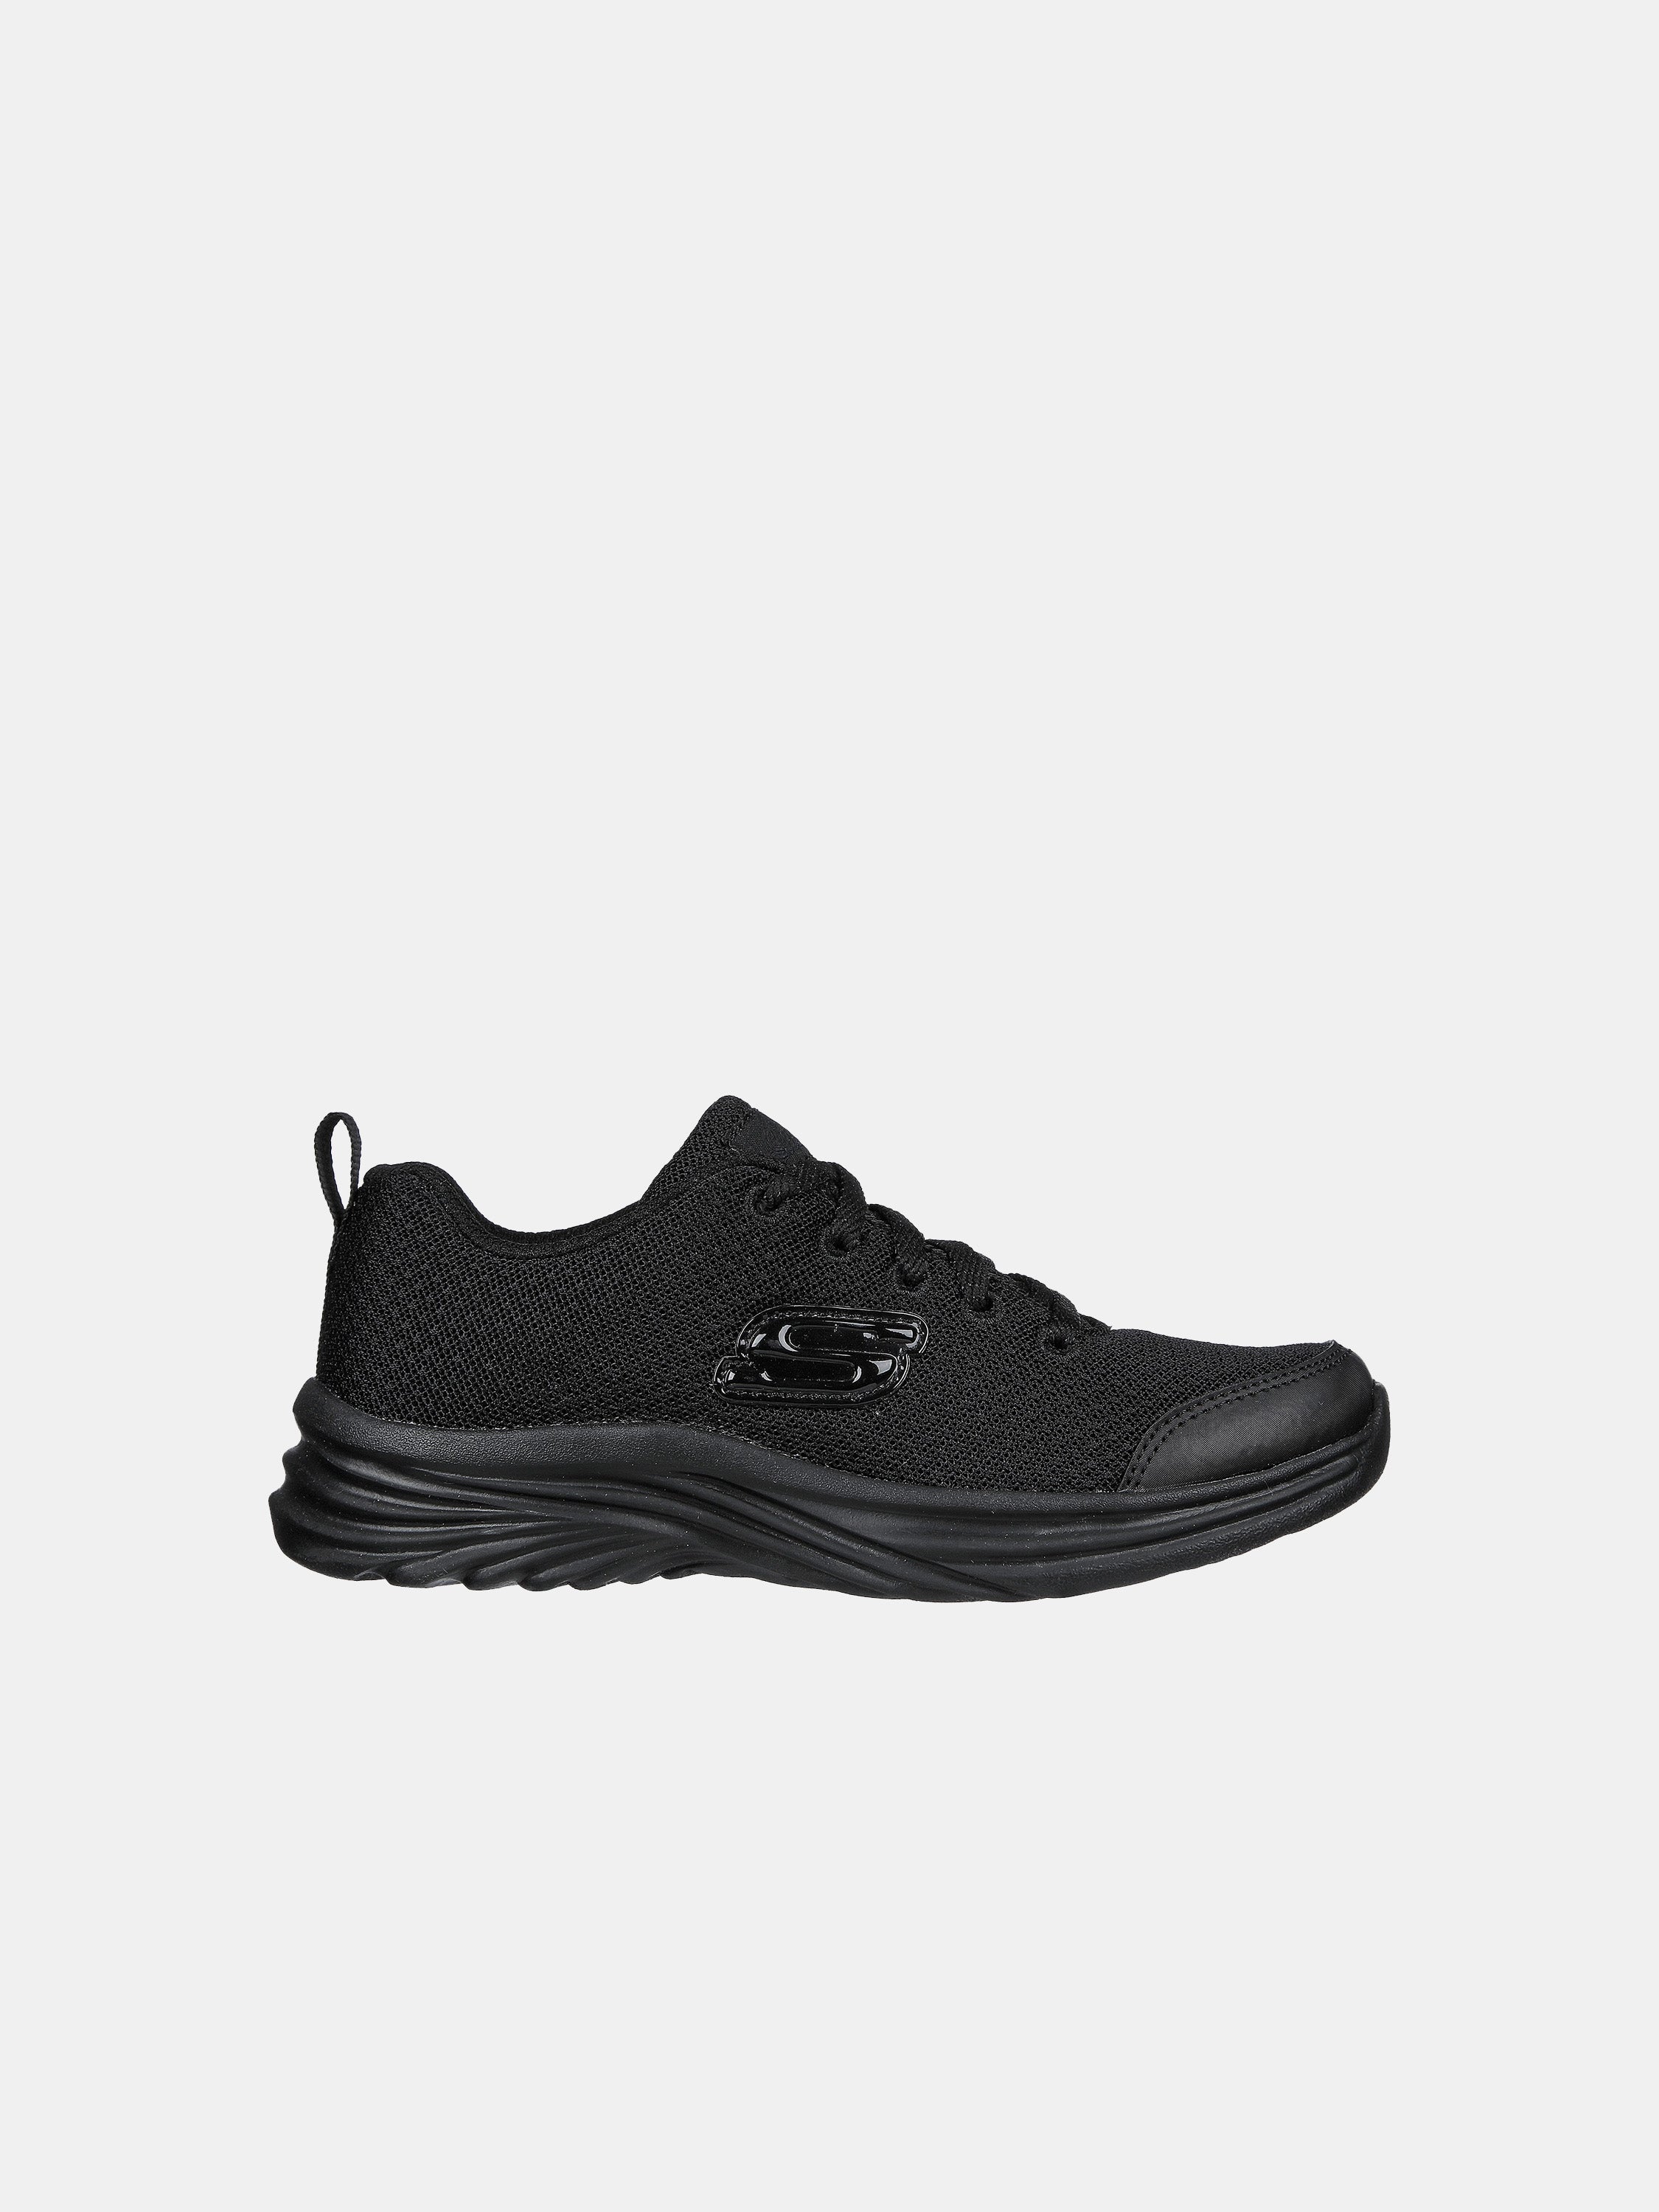 Skechers Girls Dreamy Dancer - Simply Bold Shoes #color_Black